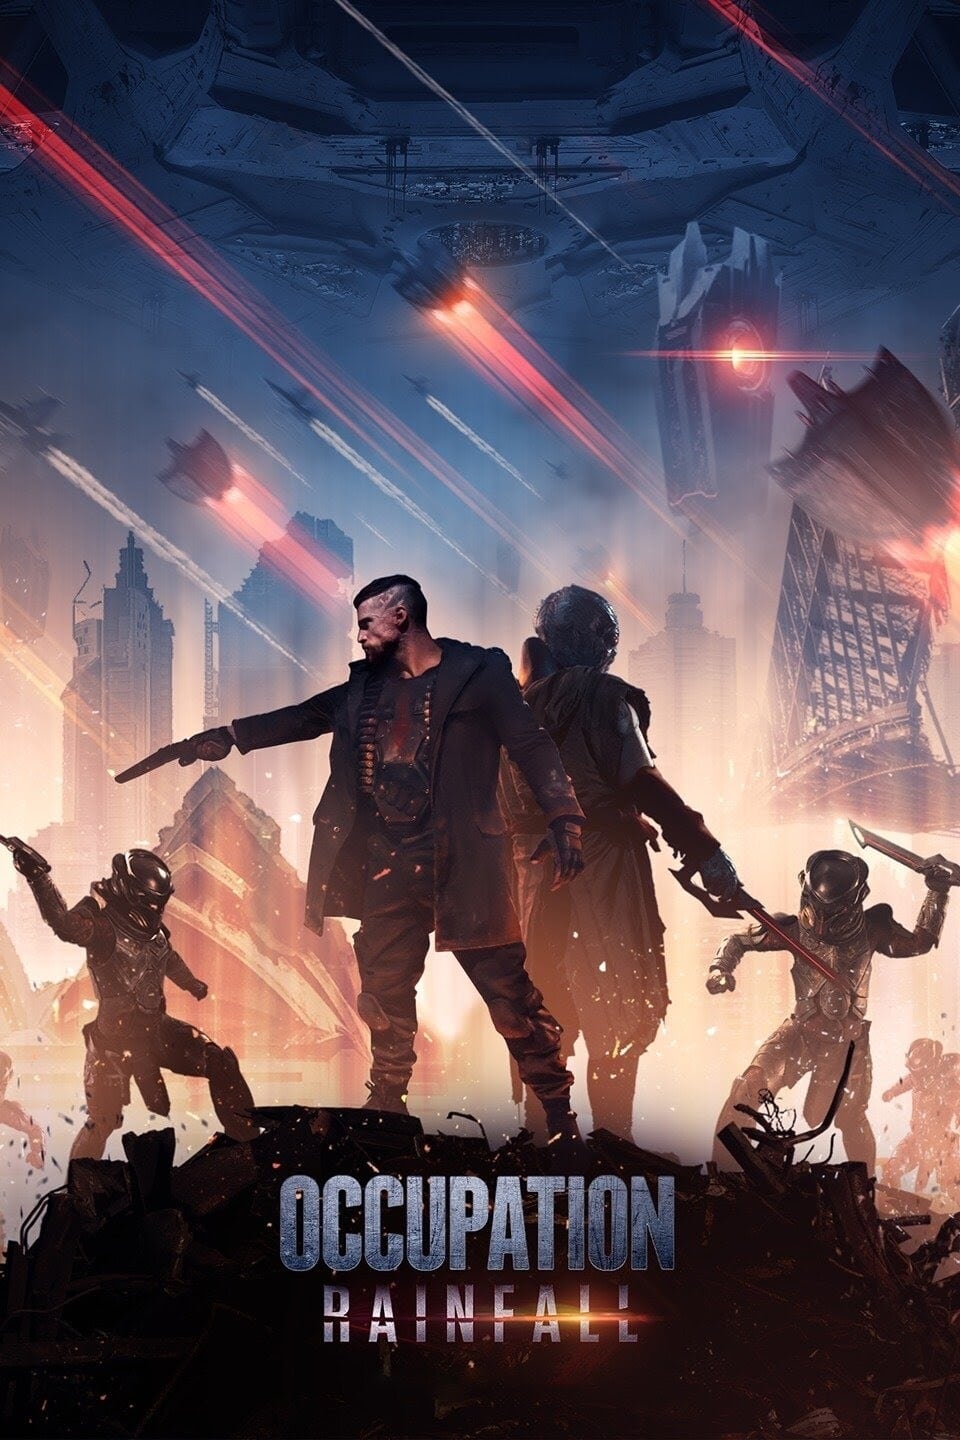 Poster for the movie "Occupation: Rainfall"